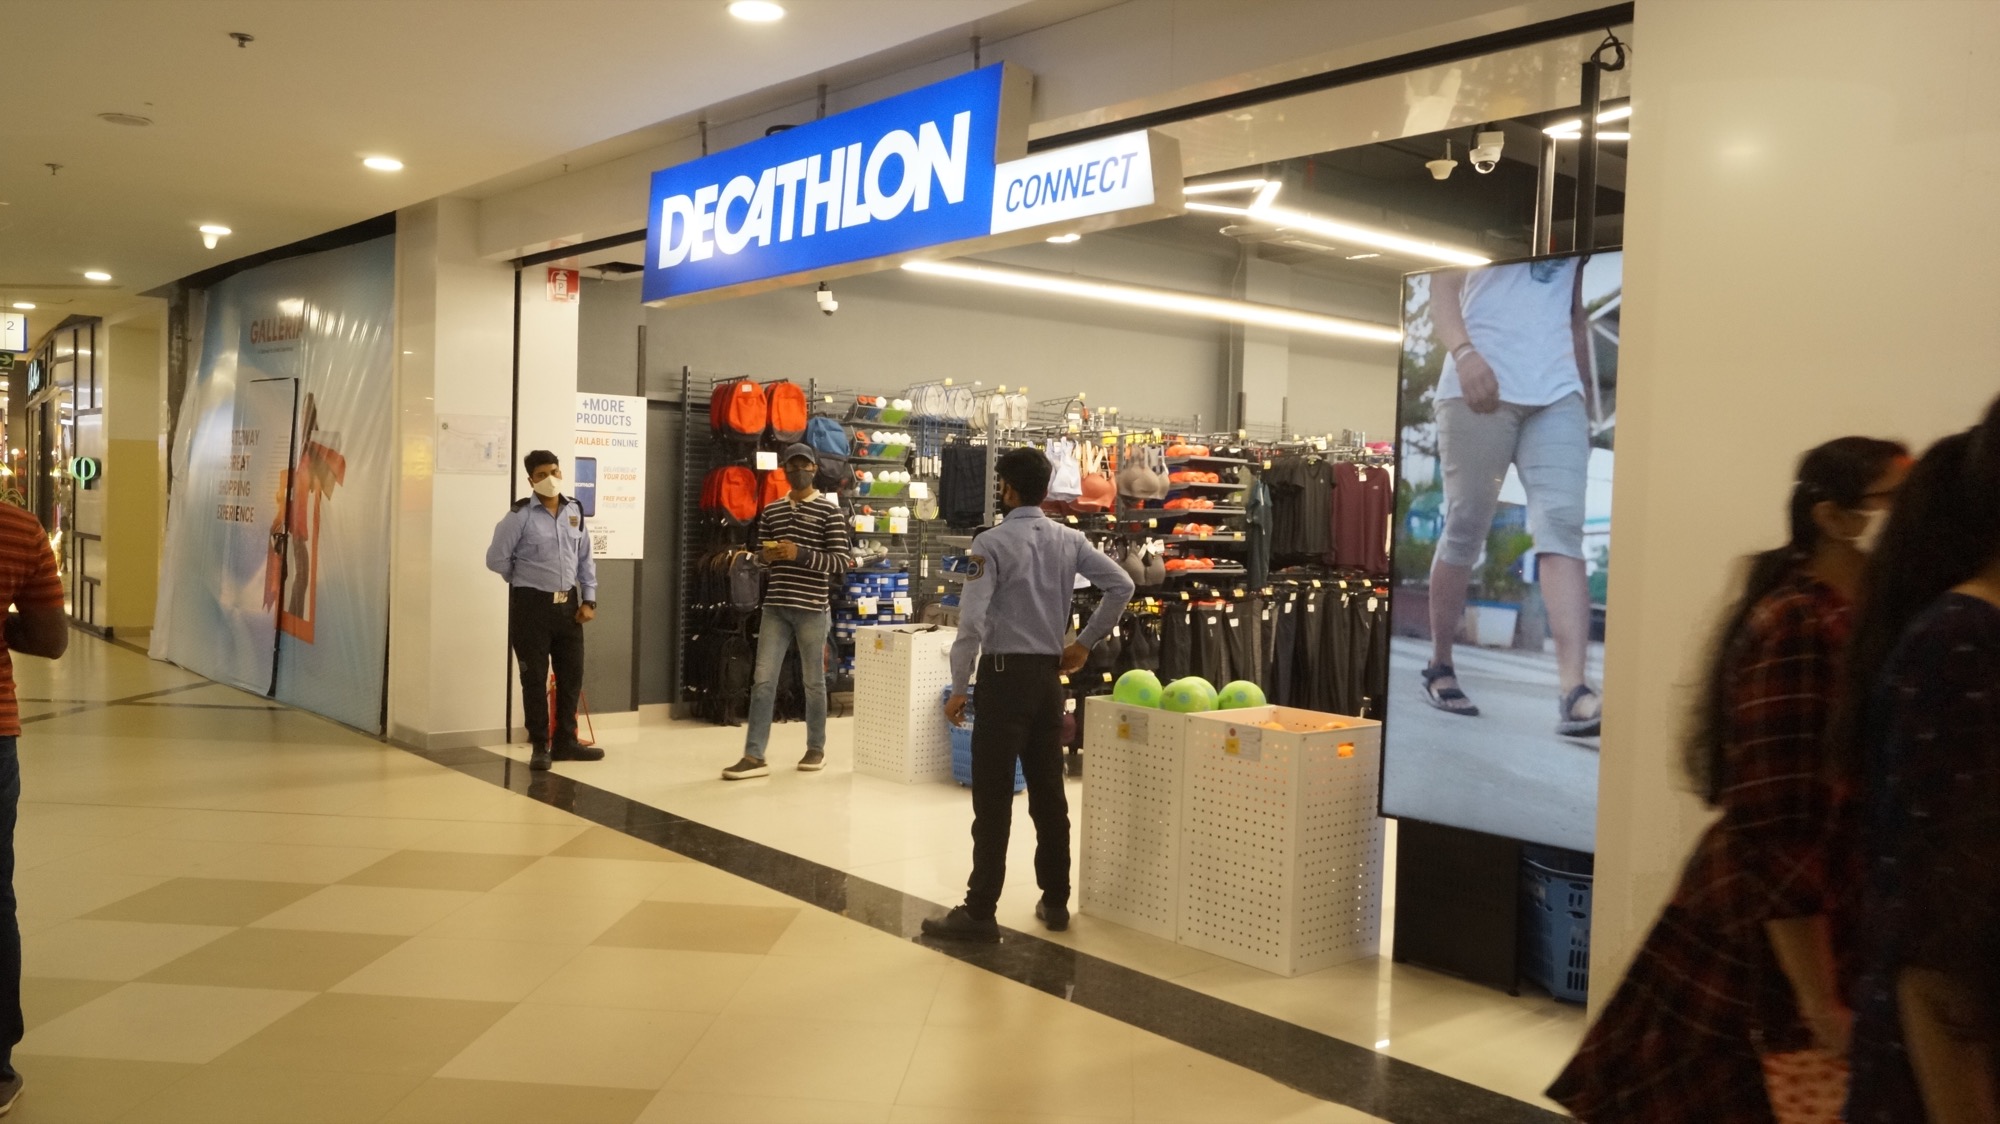 Take a peek at the all new Decathlon Connect – adobo Magazine